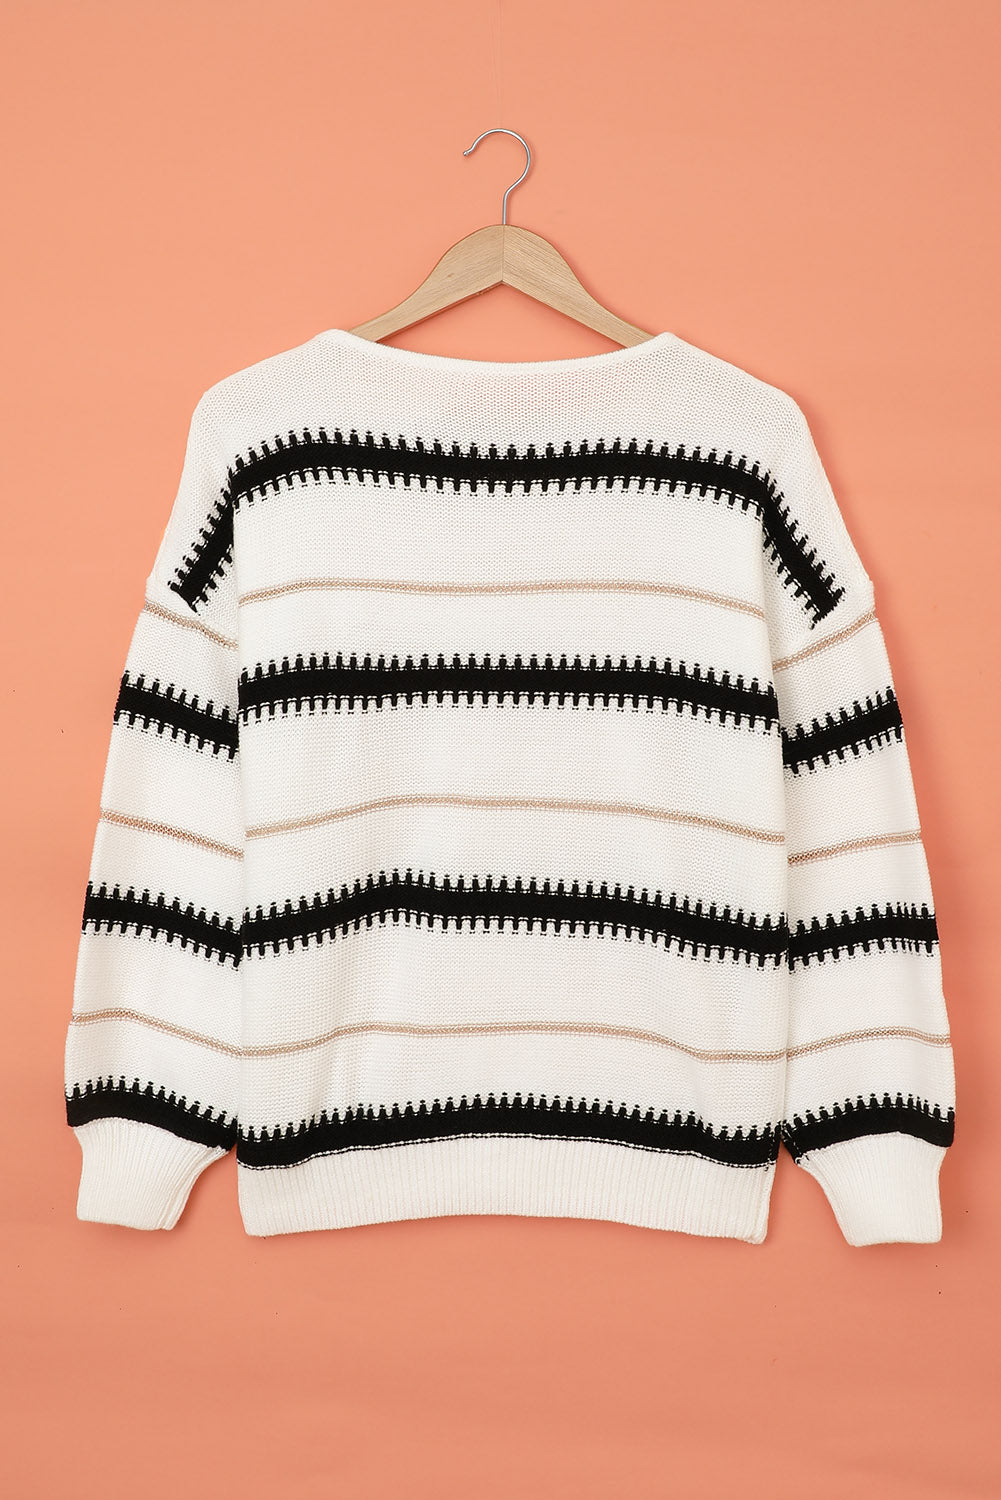 Women's White Striped Loose Fit Pullover Sweater